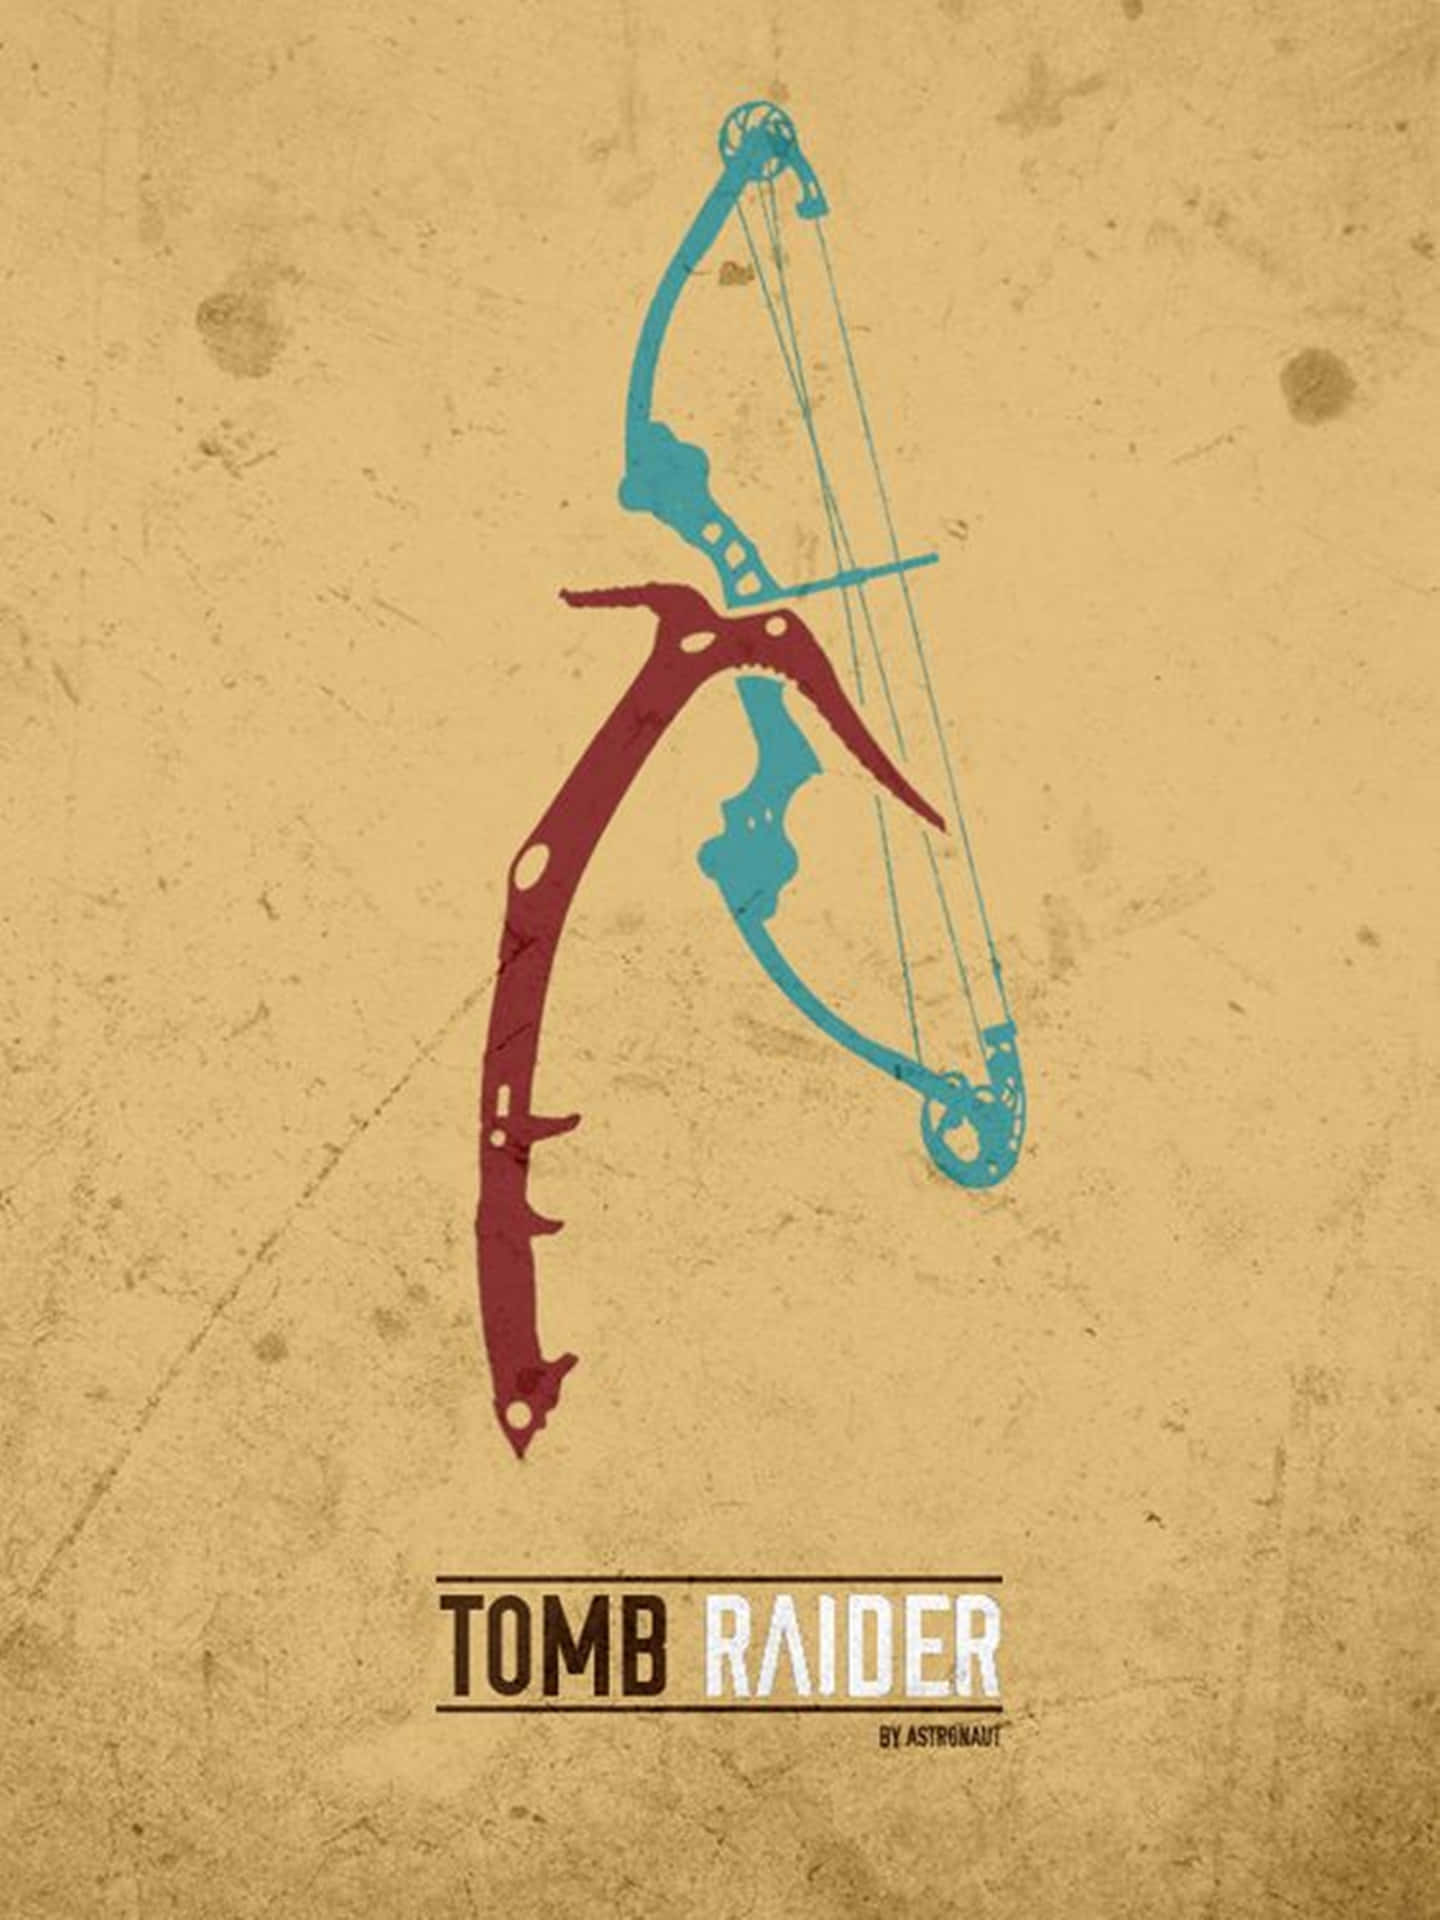 Play Tomb Raider on Your Phone Wallpaper